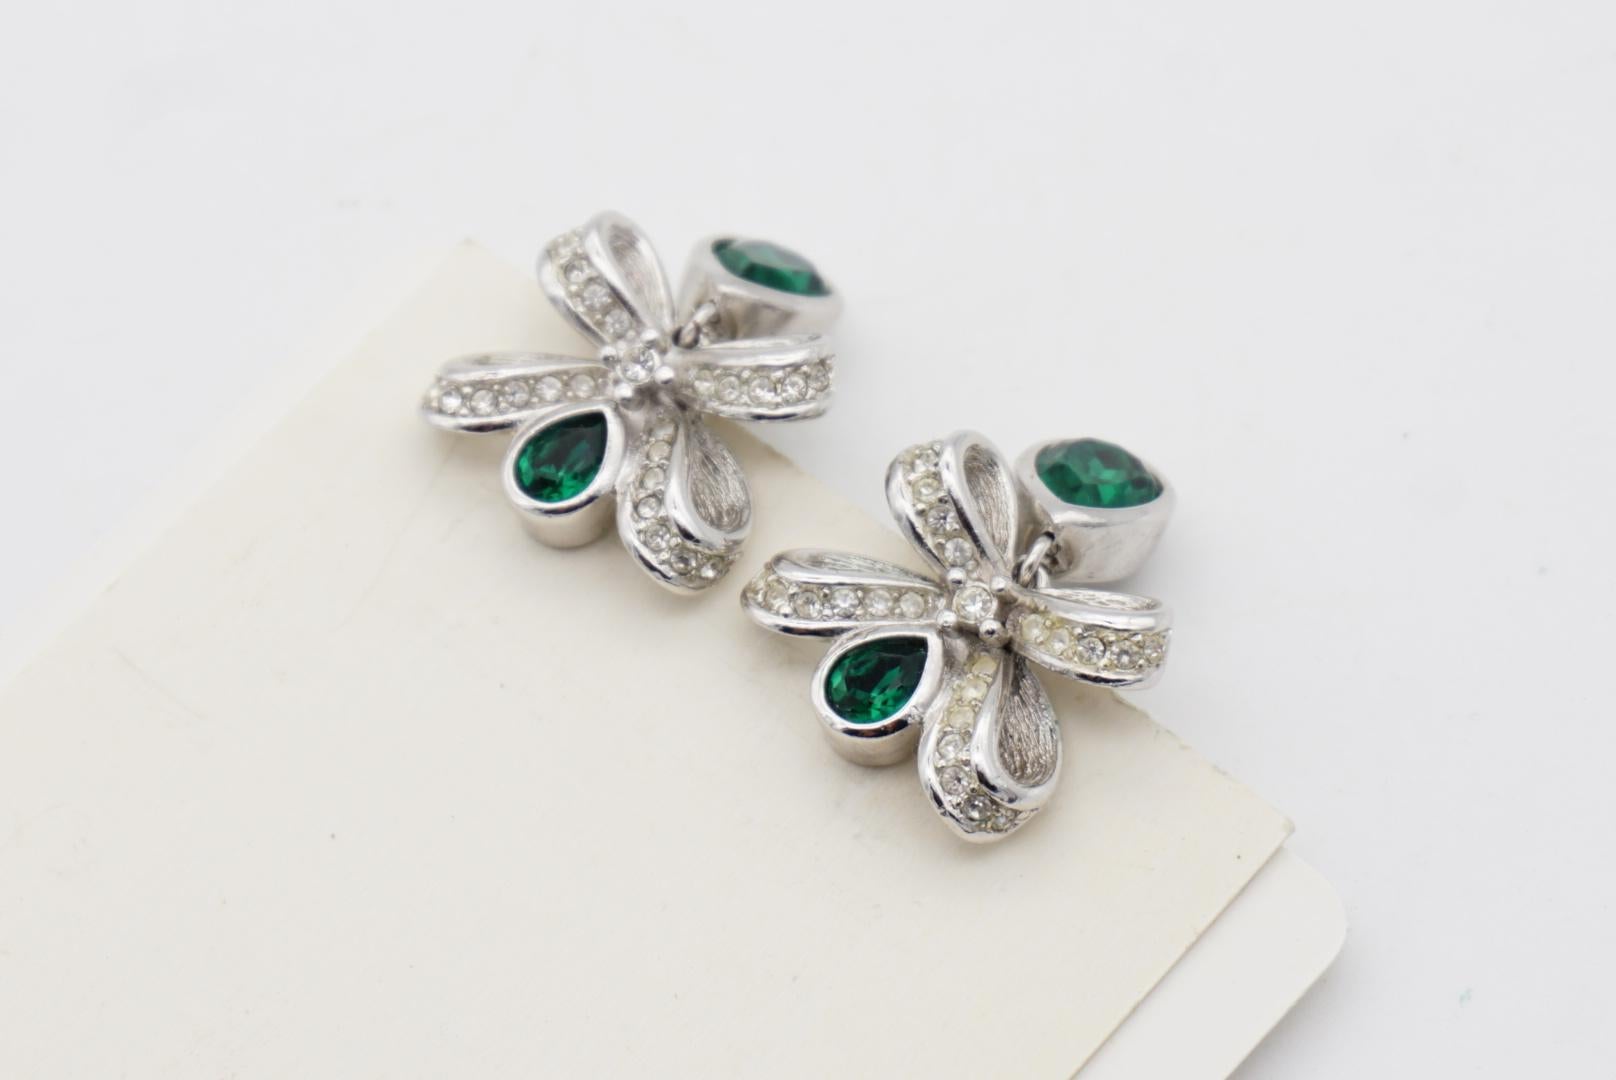 Christian Dior Vintage 1980s Knot Bow Crystals Emerald Water Drop Clip Earrings For Sale 6